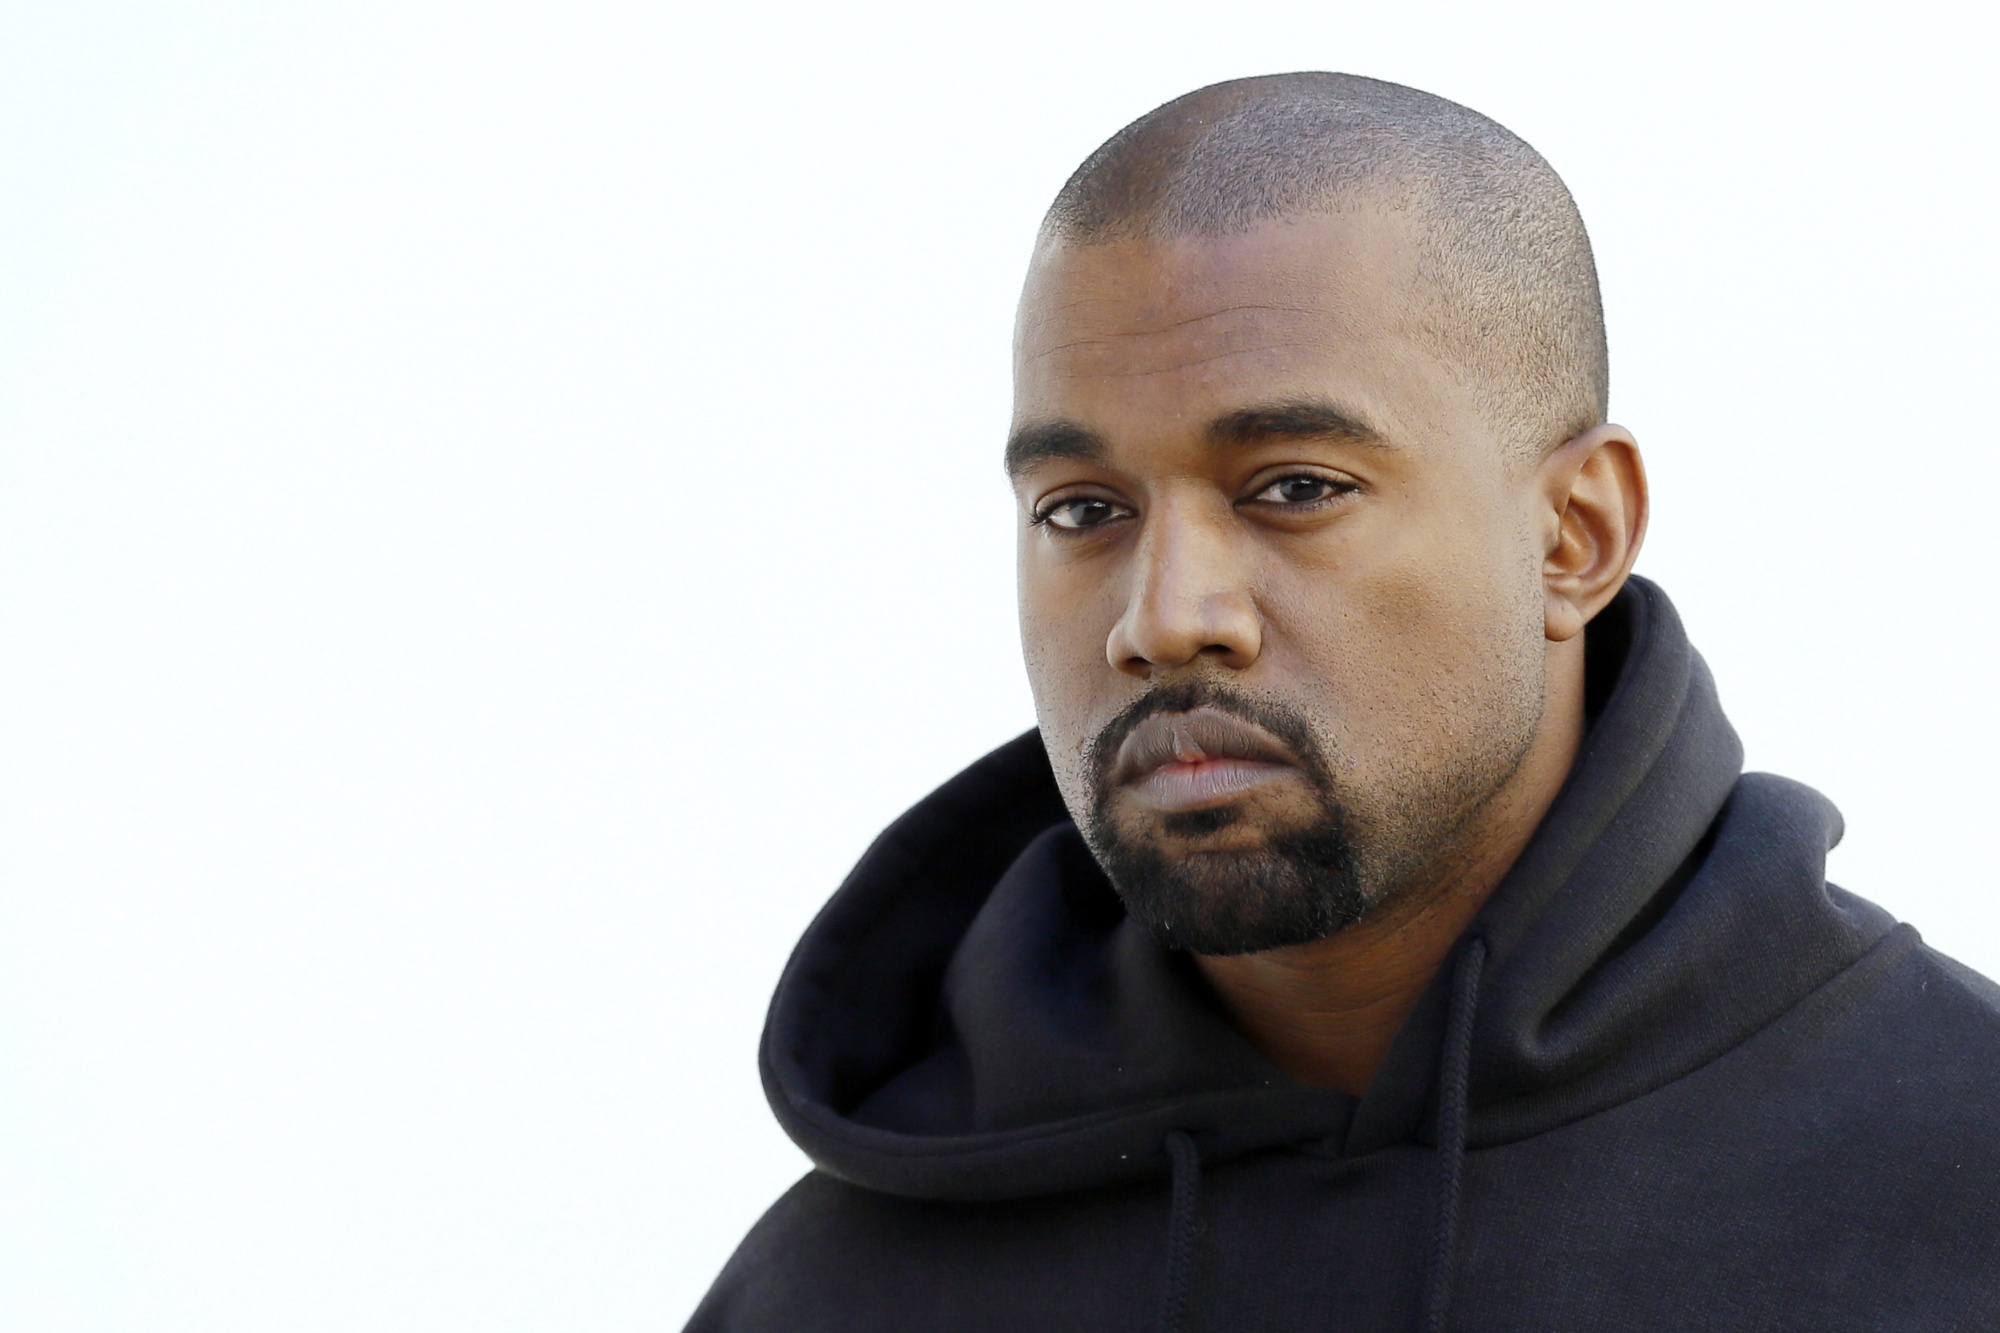 Kanye West wanted his Yeezy clothing collection at Gap priced at $20, not  $200